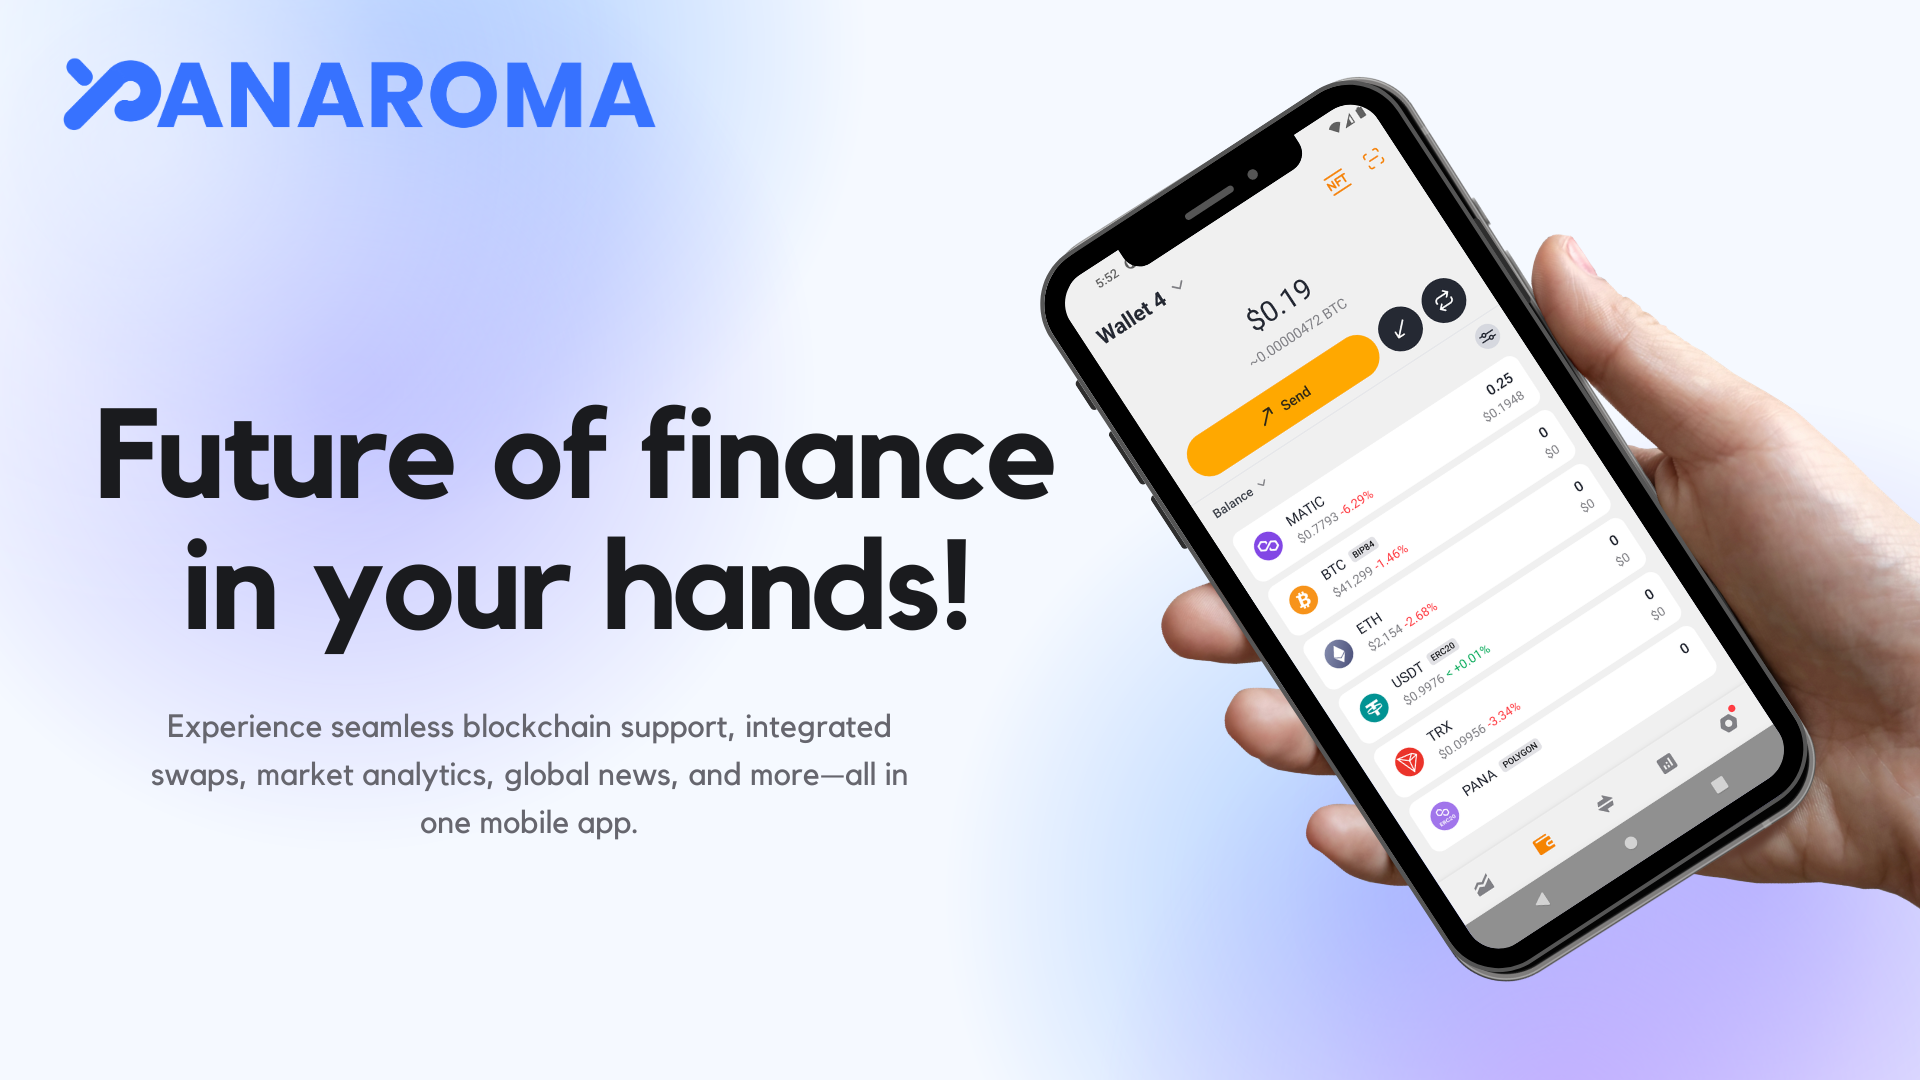 The Future of Finance in Your Hands: A Breakdown of Panaroma Decentralized Wallet’s Key Features